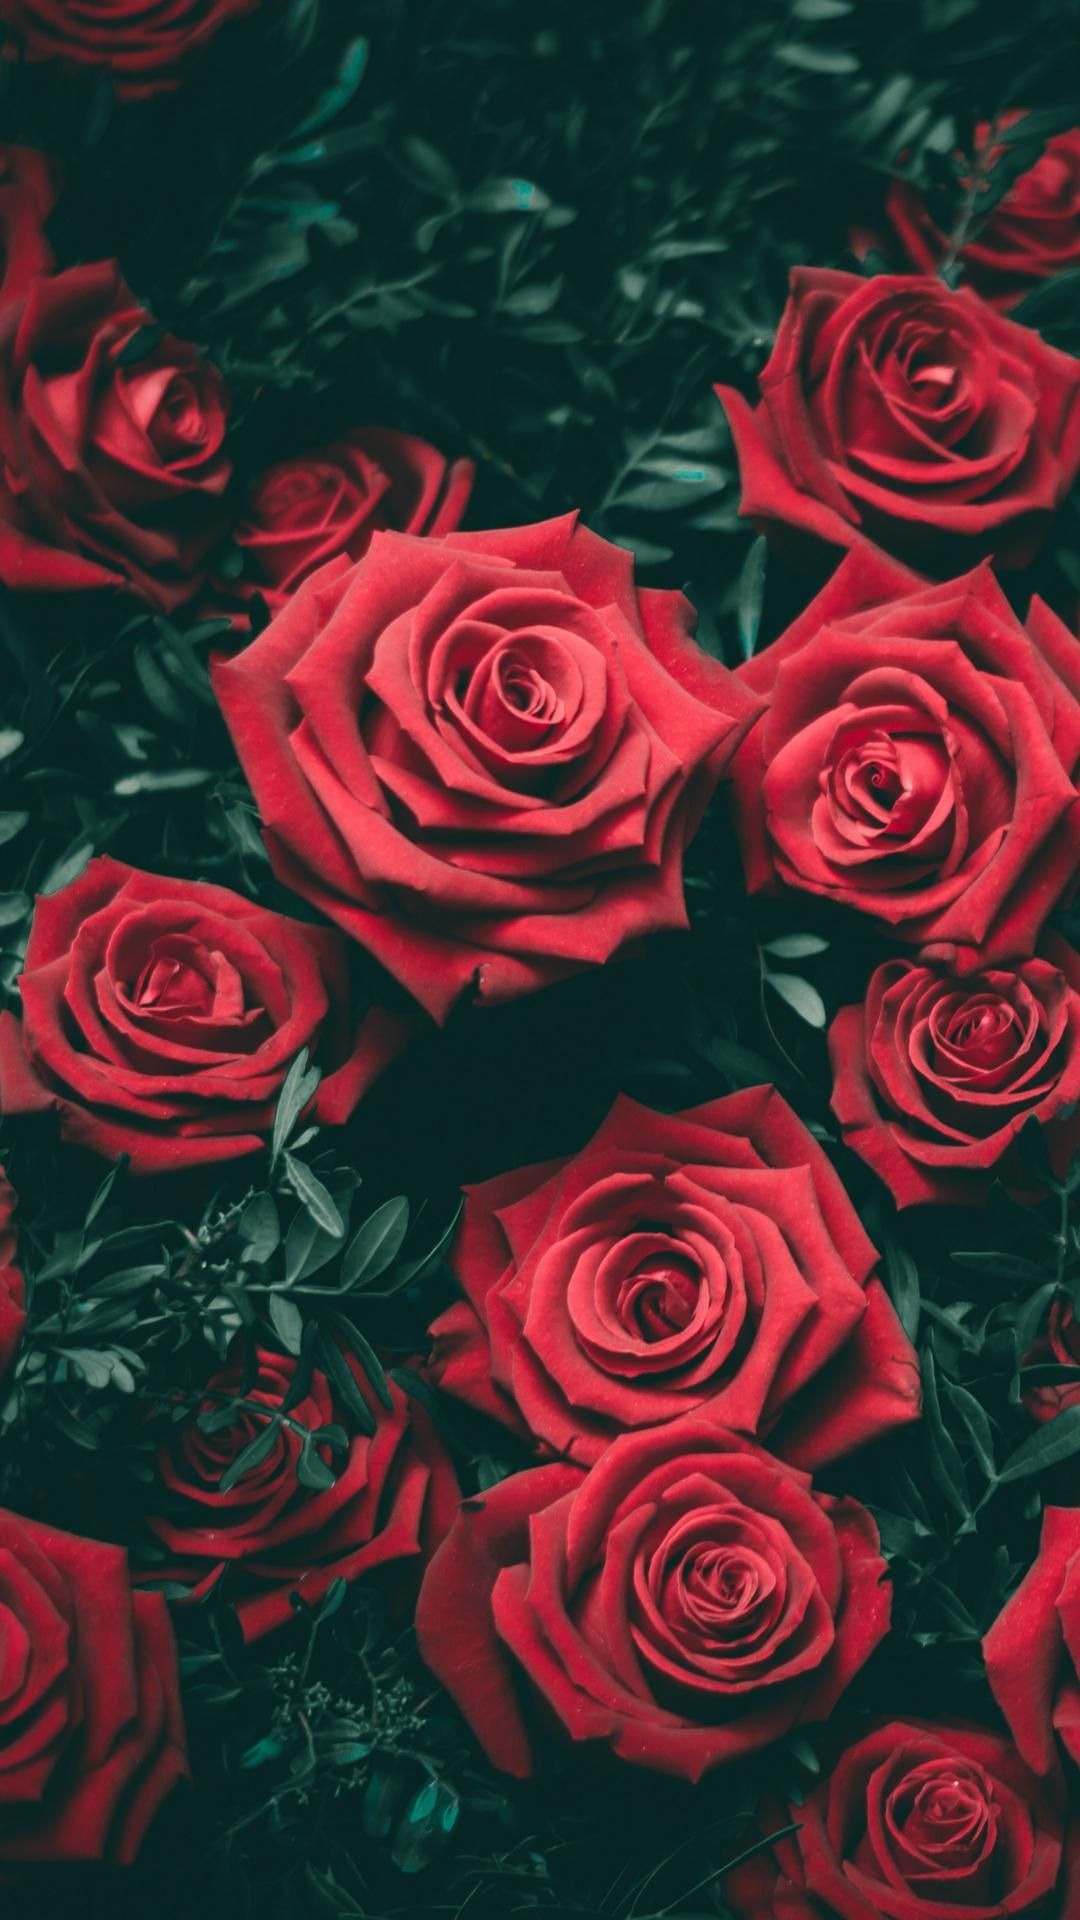 IPhone wallpaper with red roses - Beautiful